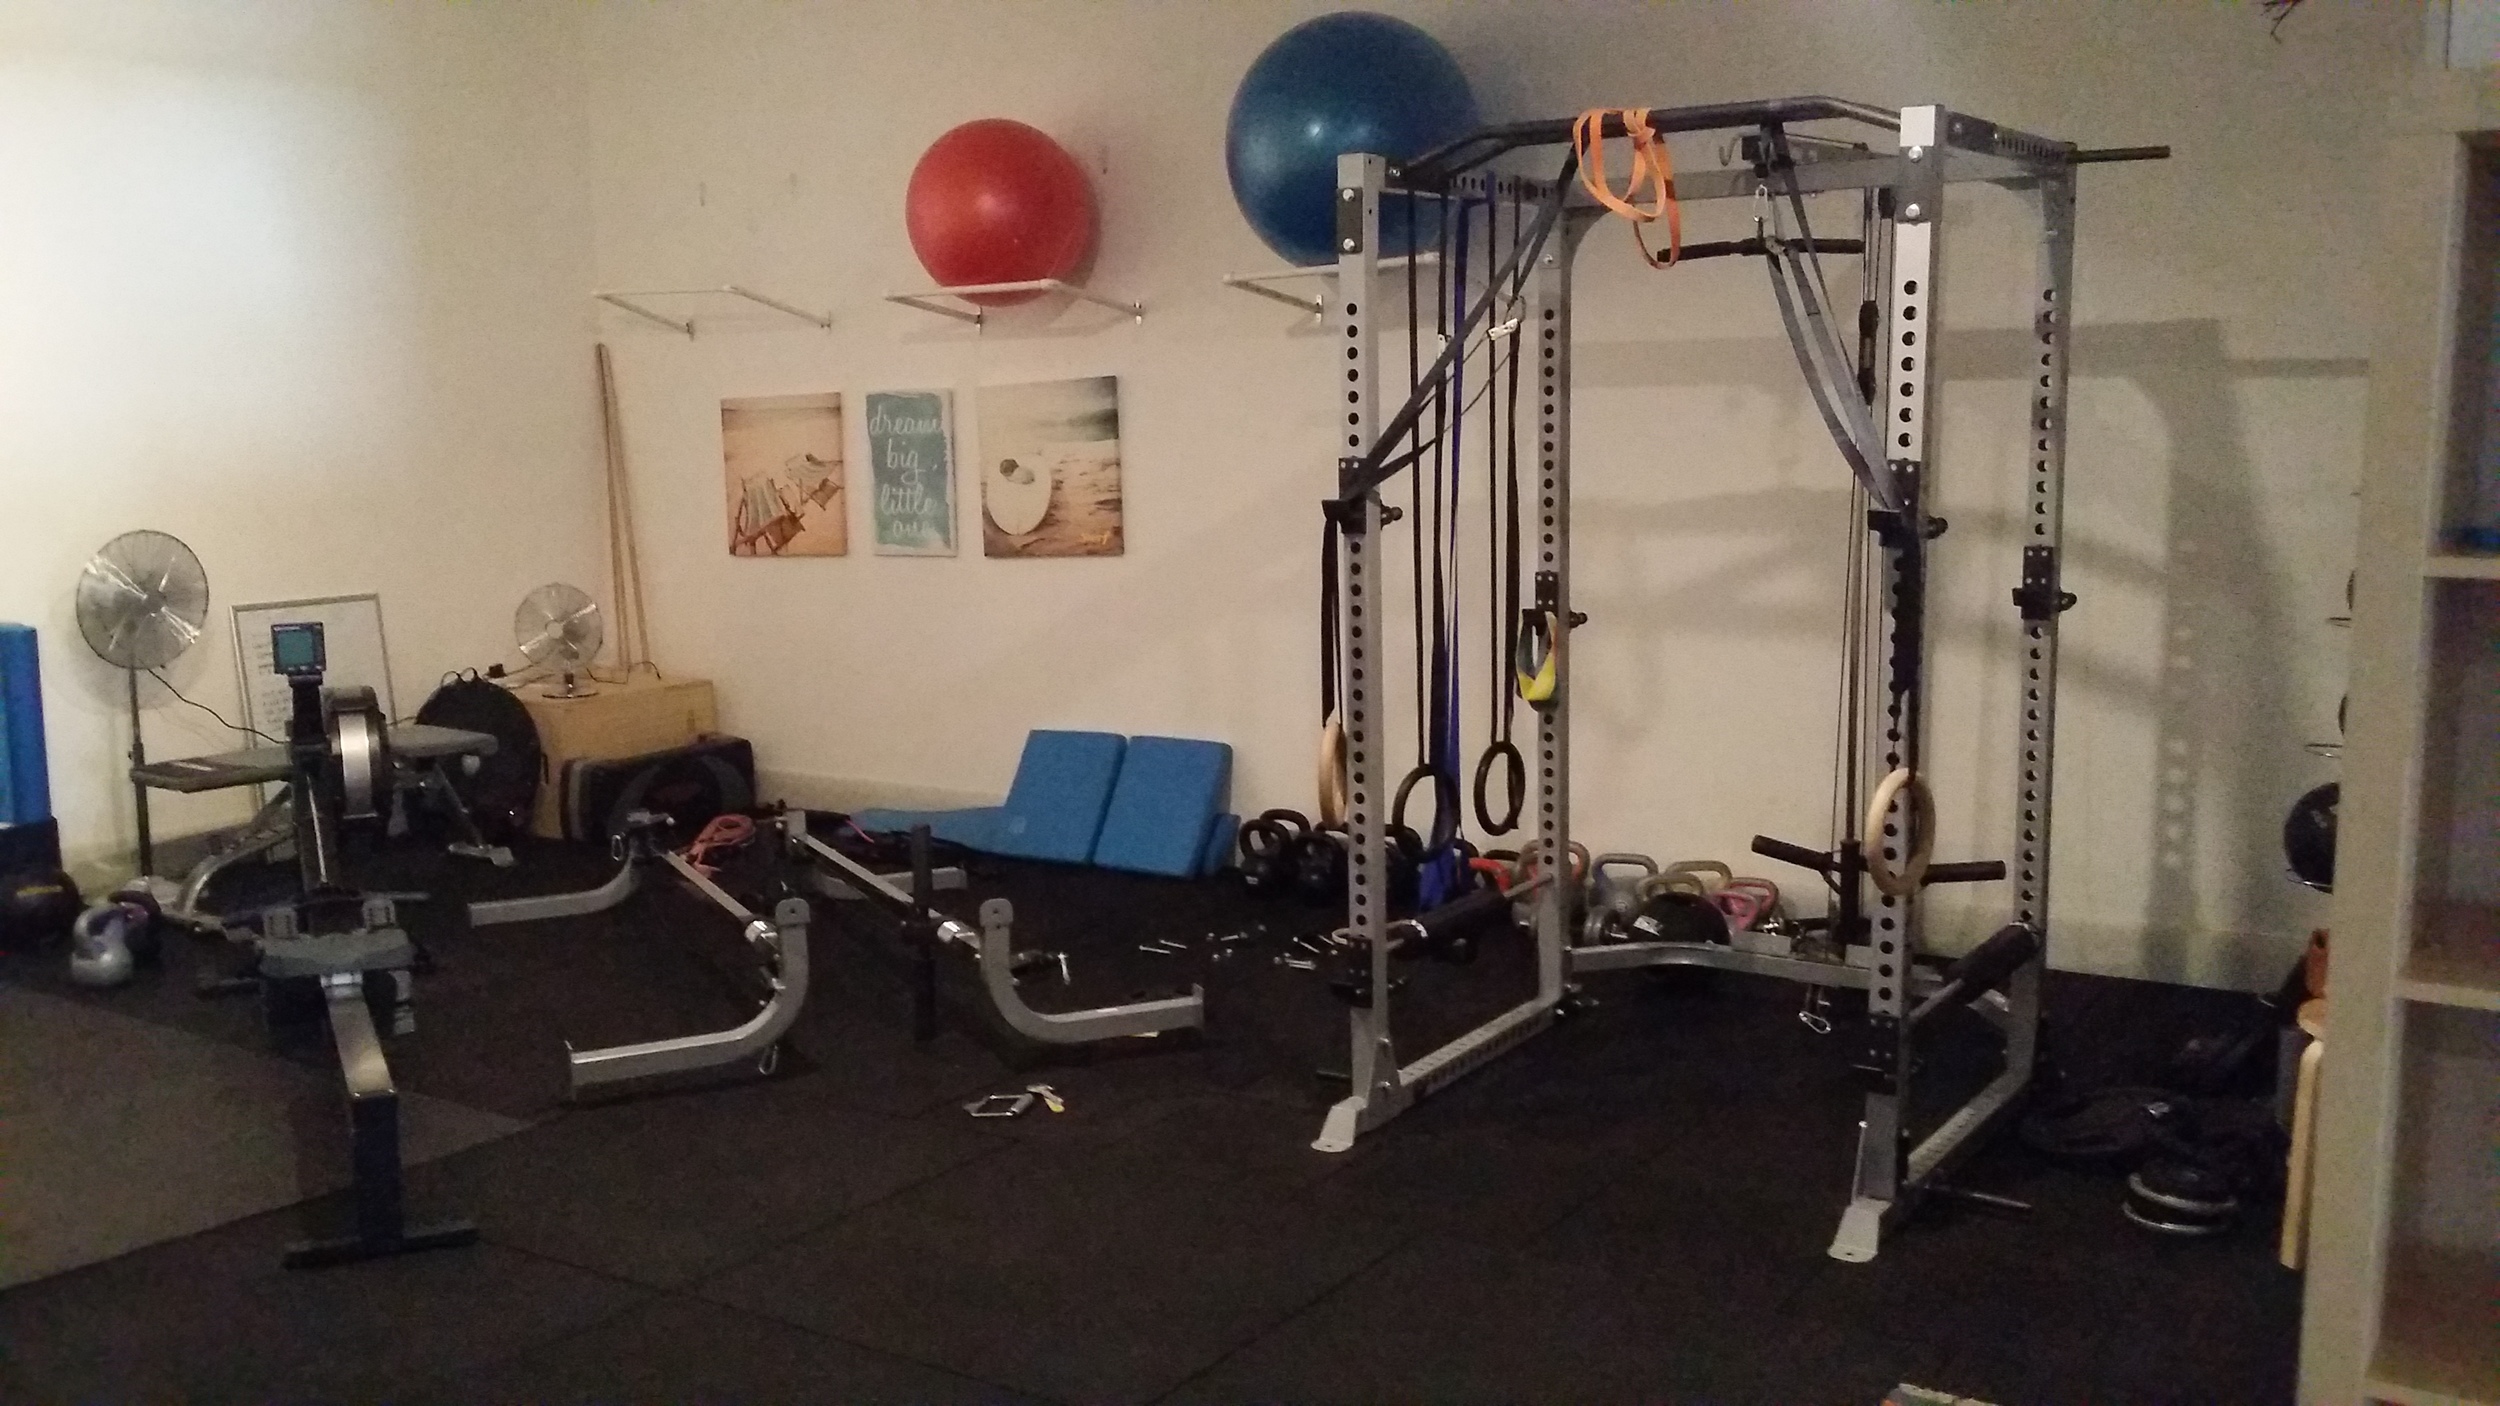 Moov Personal Training Adelaide: gym space getting relocated